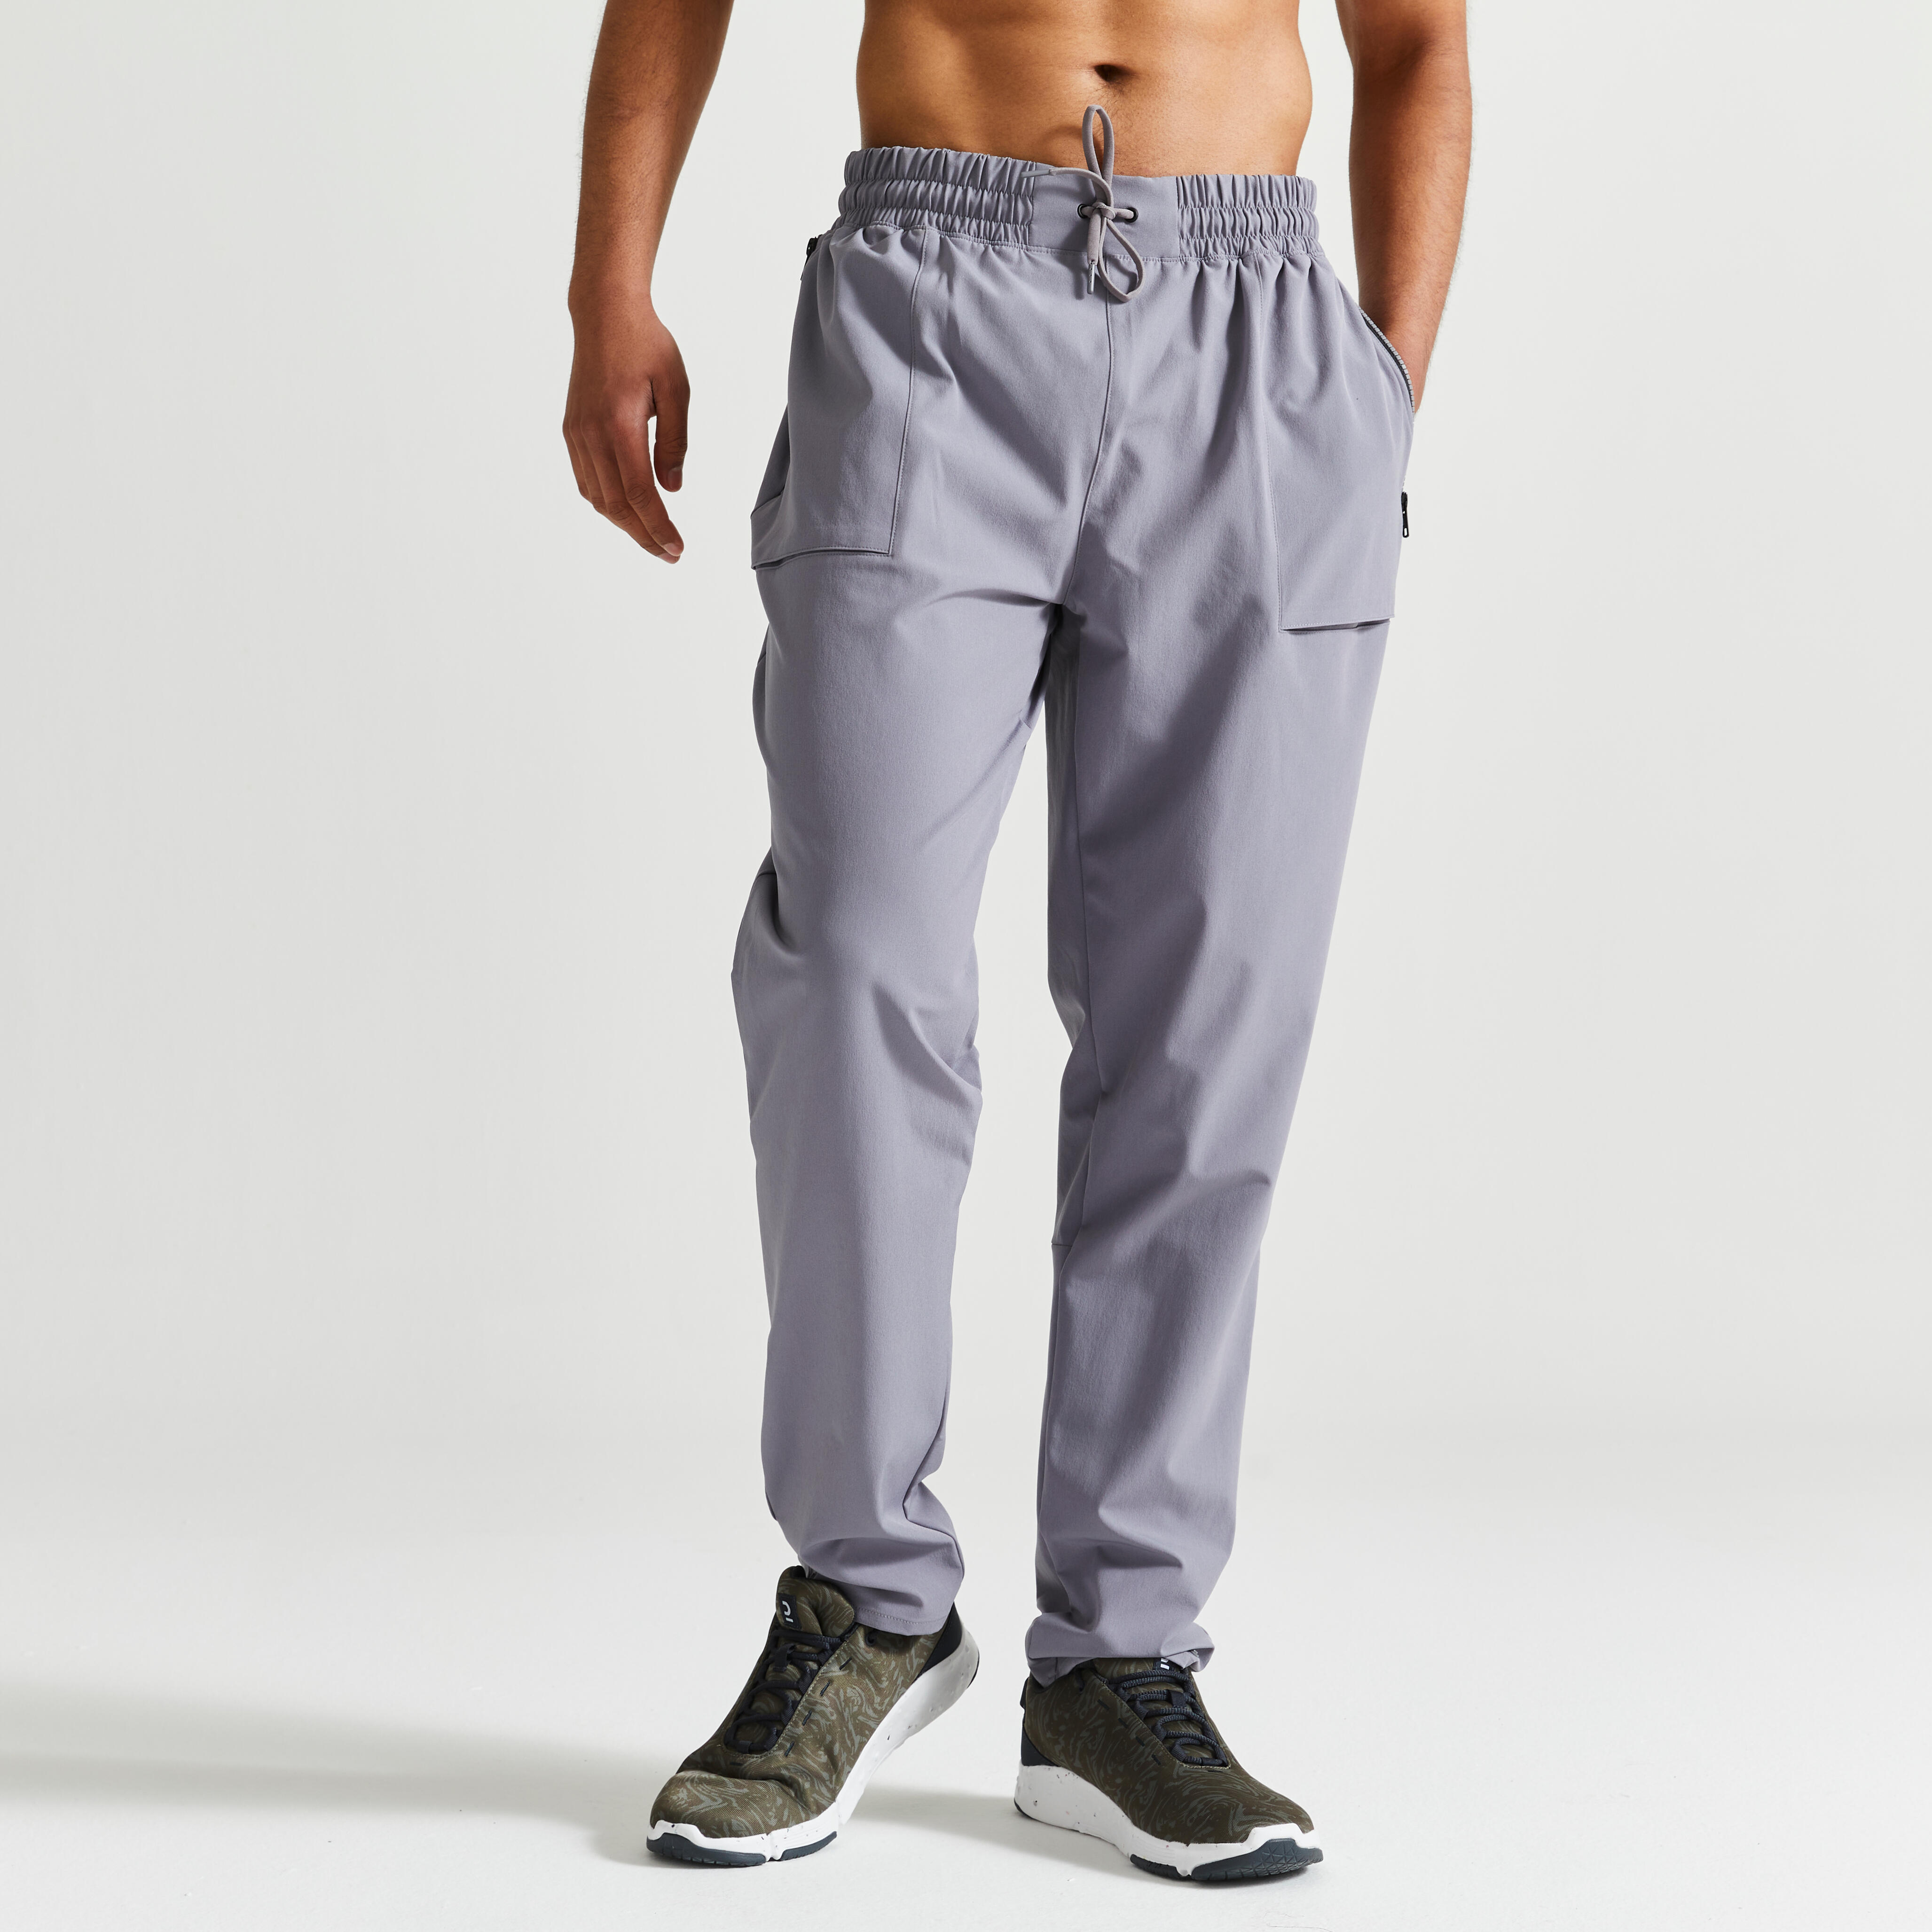 Decathlon Sports India - Here's an amazing offer on Sweat managing straight  fit track pants! #buymoresavemore Order now: https://www.decathlon.in/qr/8610942/-1  #decathlonkompally #decathlonsportsindia #sale #offer | Facebook